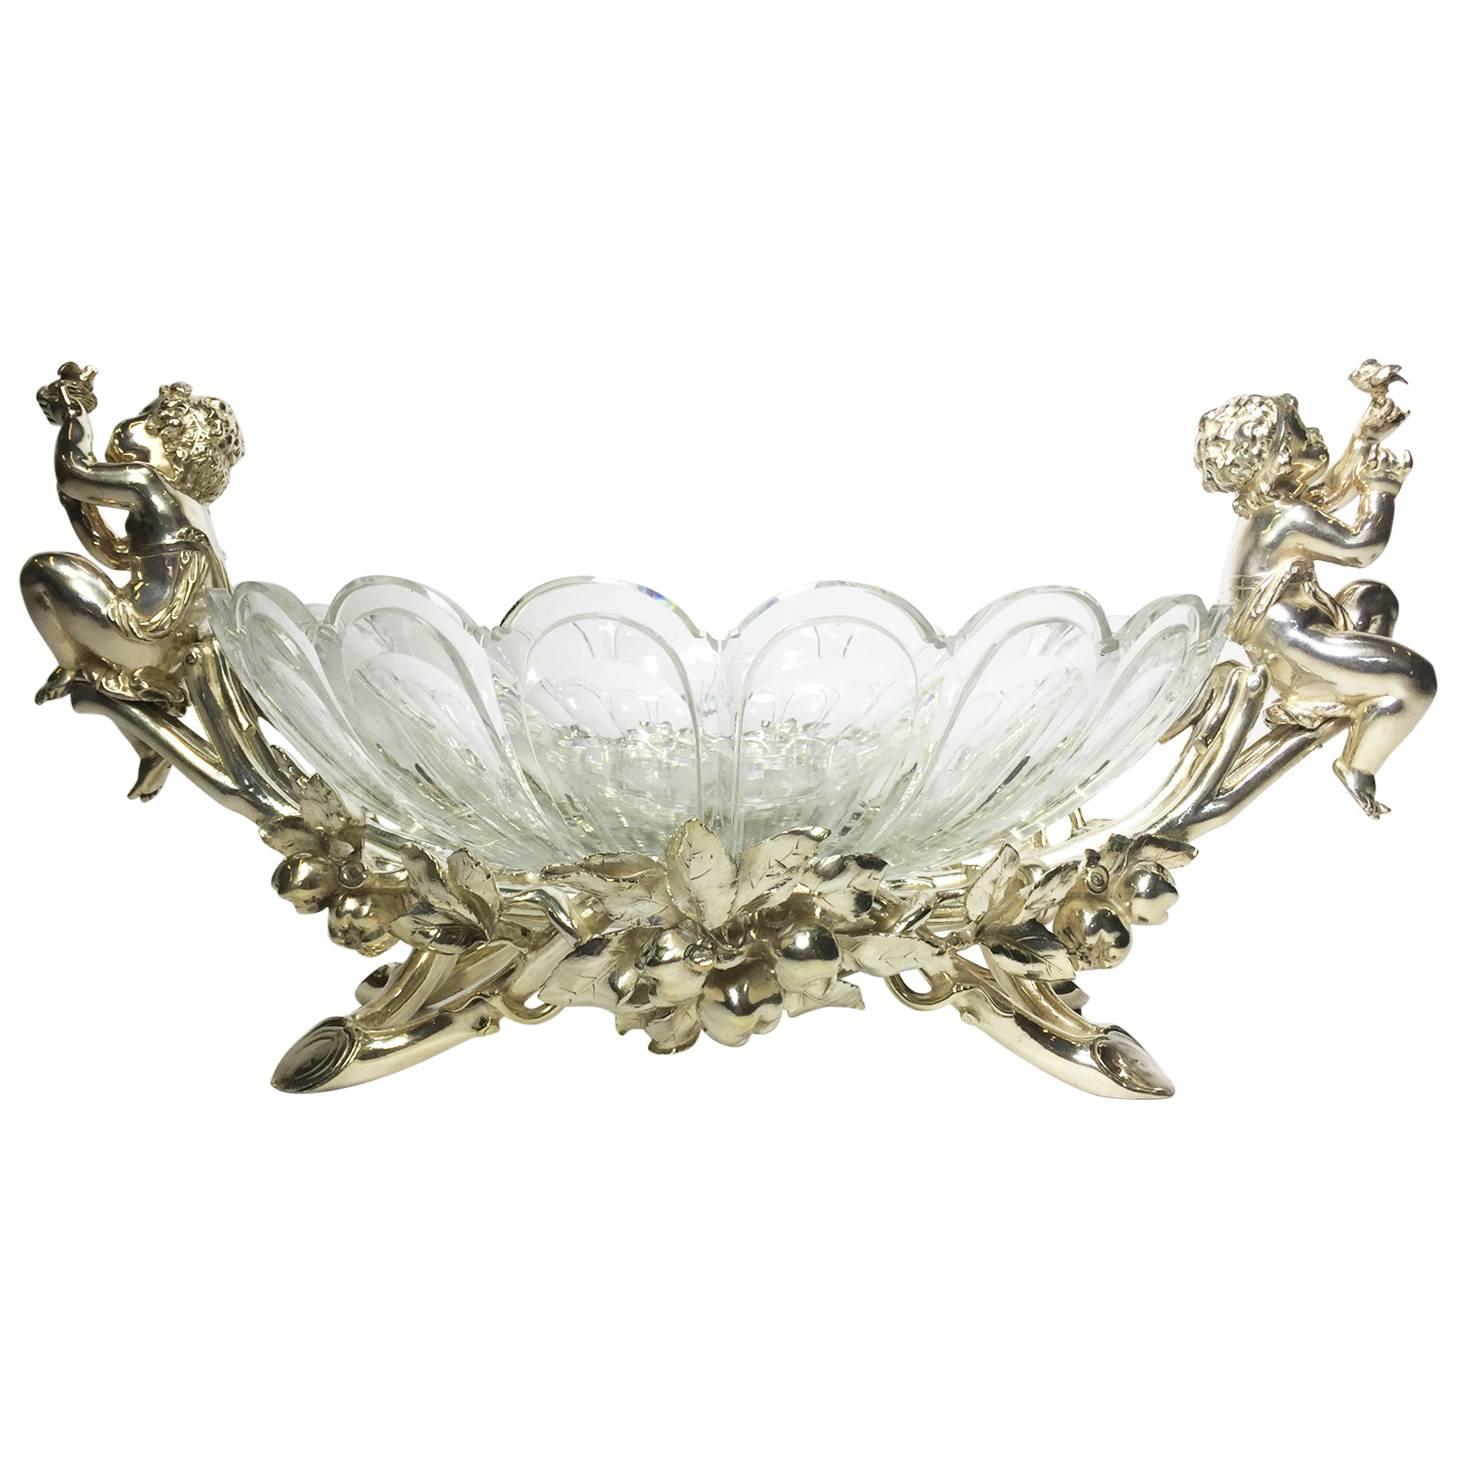 French 19th-20th Century Louis XV Style Silvered Christofle & Cie Centerpiece For Sale